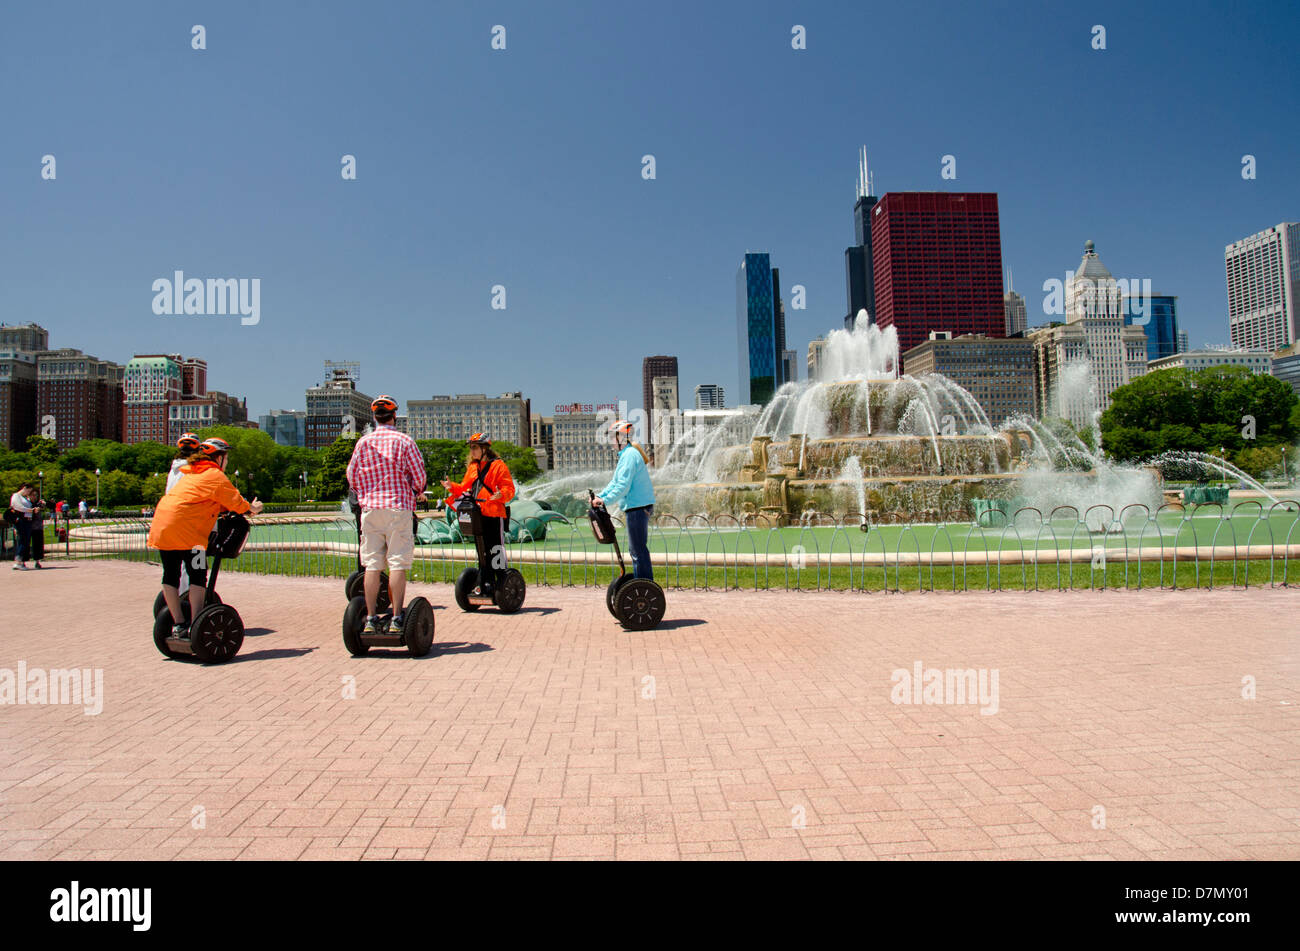 Illinois, Chicago. Segway tour in front of historic downtown fountain in Grant Park. Stock Photo